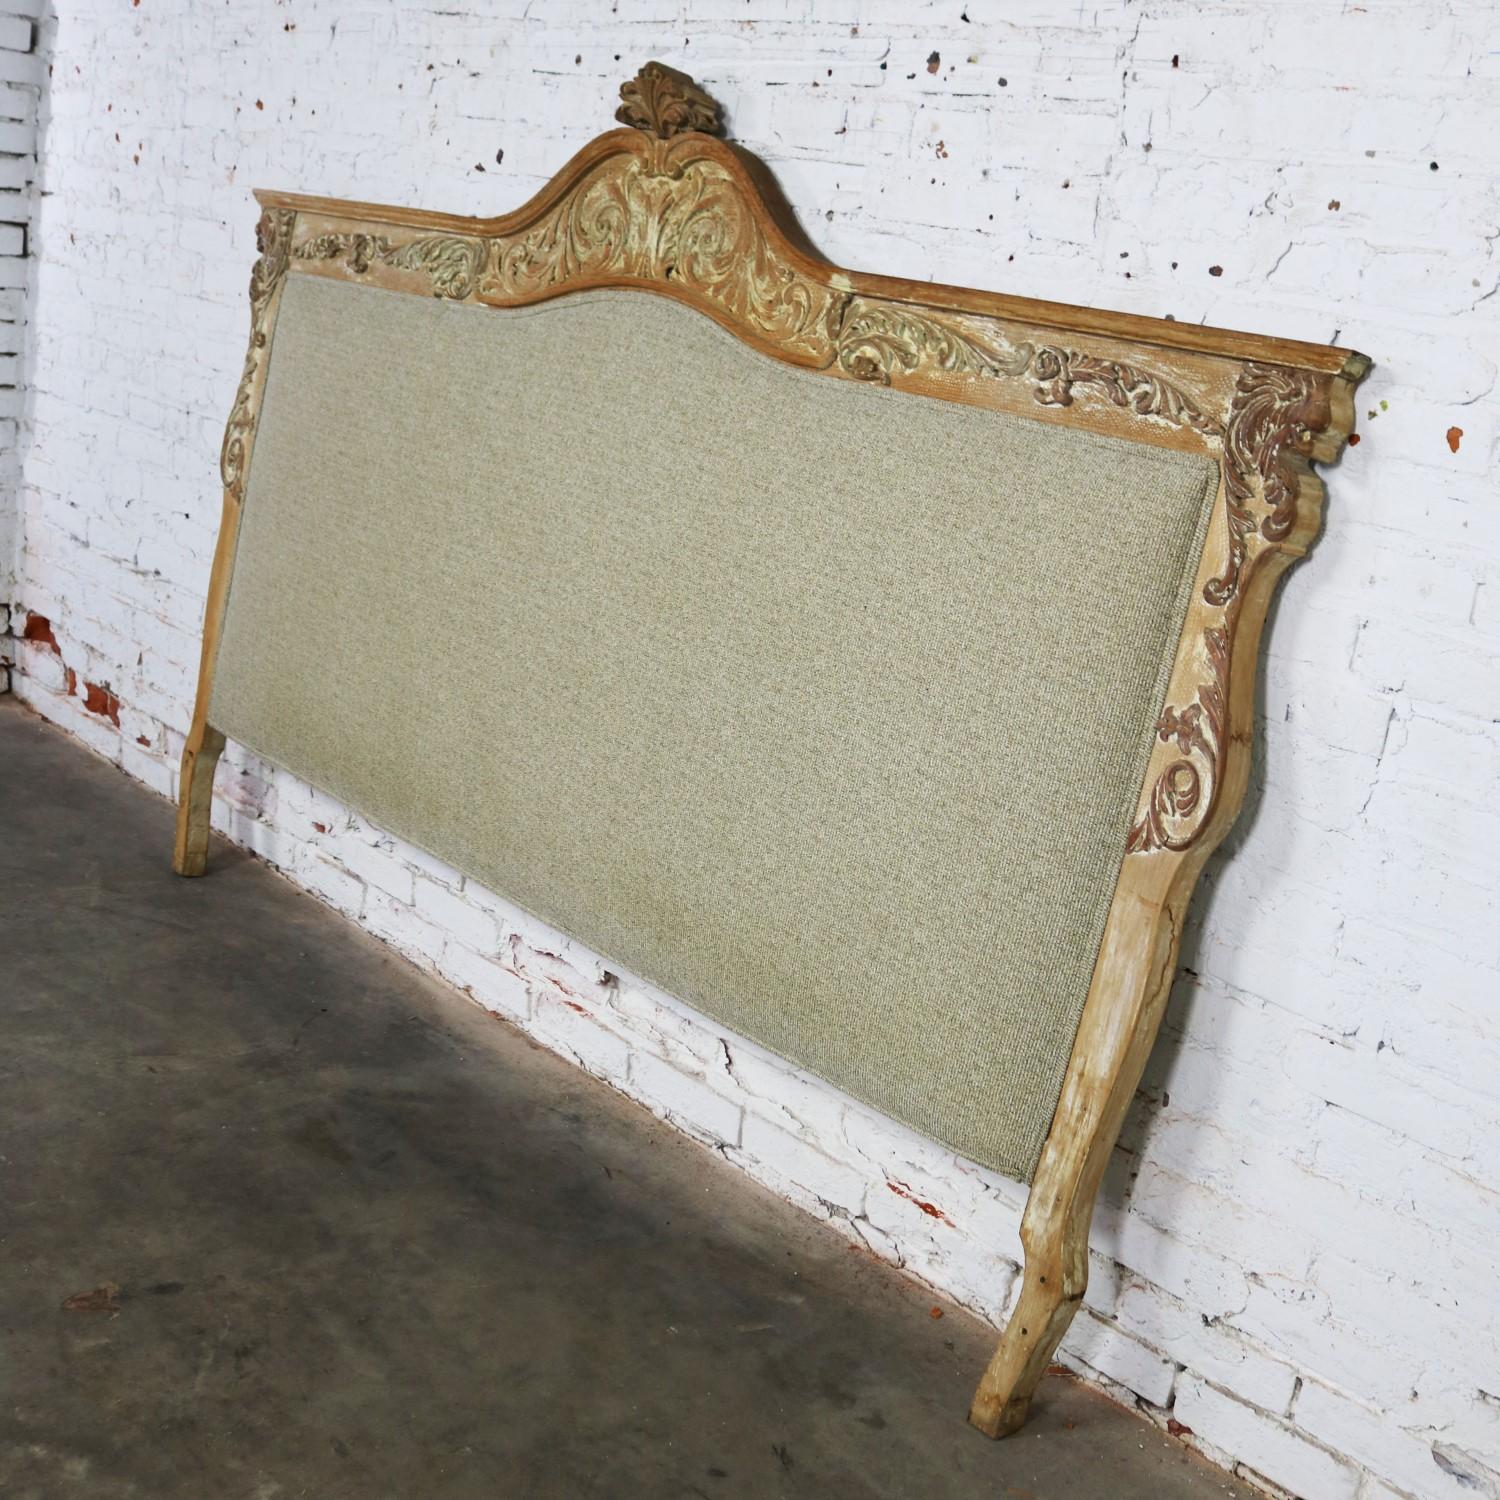 Very handsome Baroque king size headboard with carved lion heads. It is upholstered with ecru colored tweed-like fabric and has a whitewashed finish to the carved wood frame. It is in fabulous ready to use condition. The fabric is awesome, and the